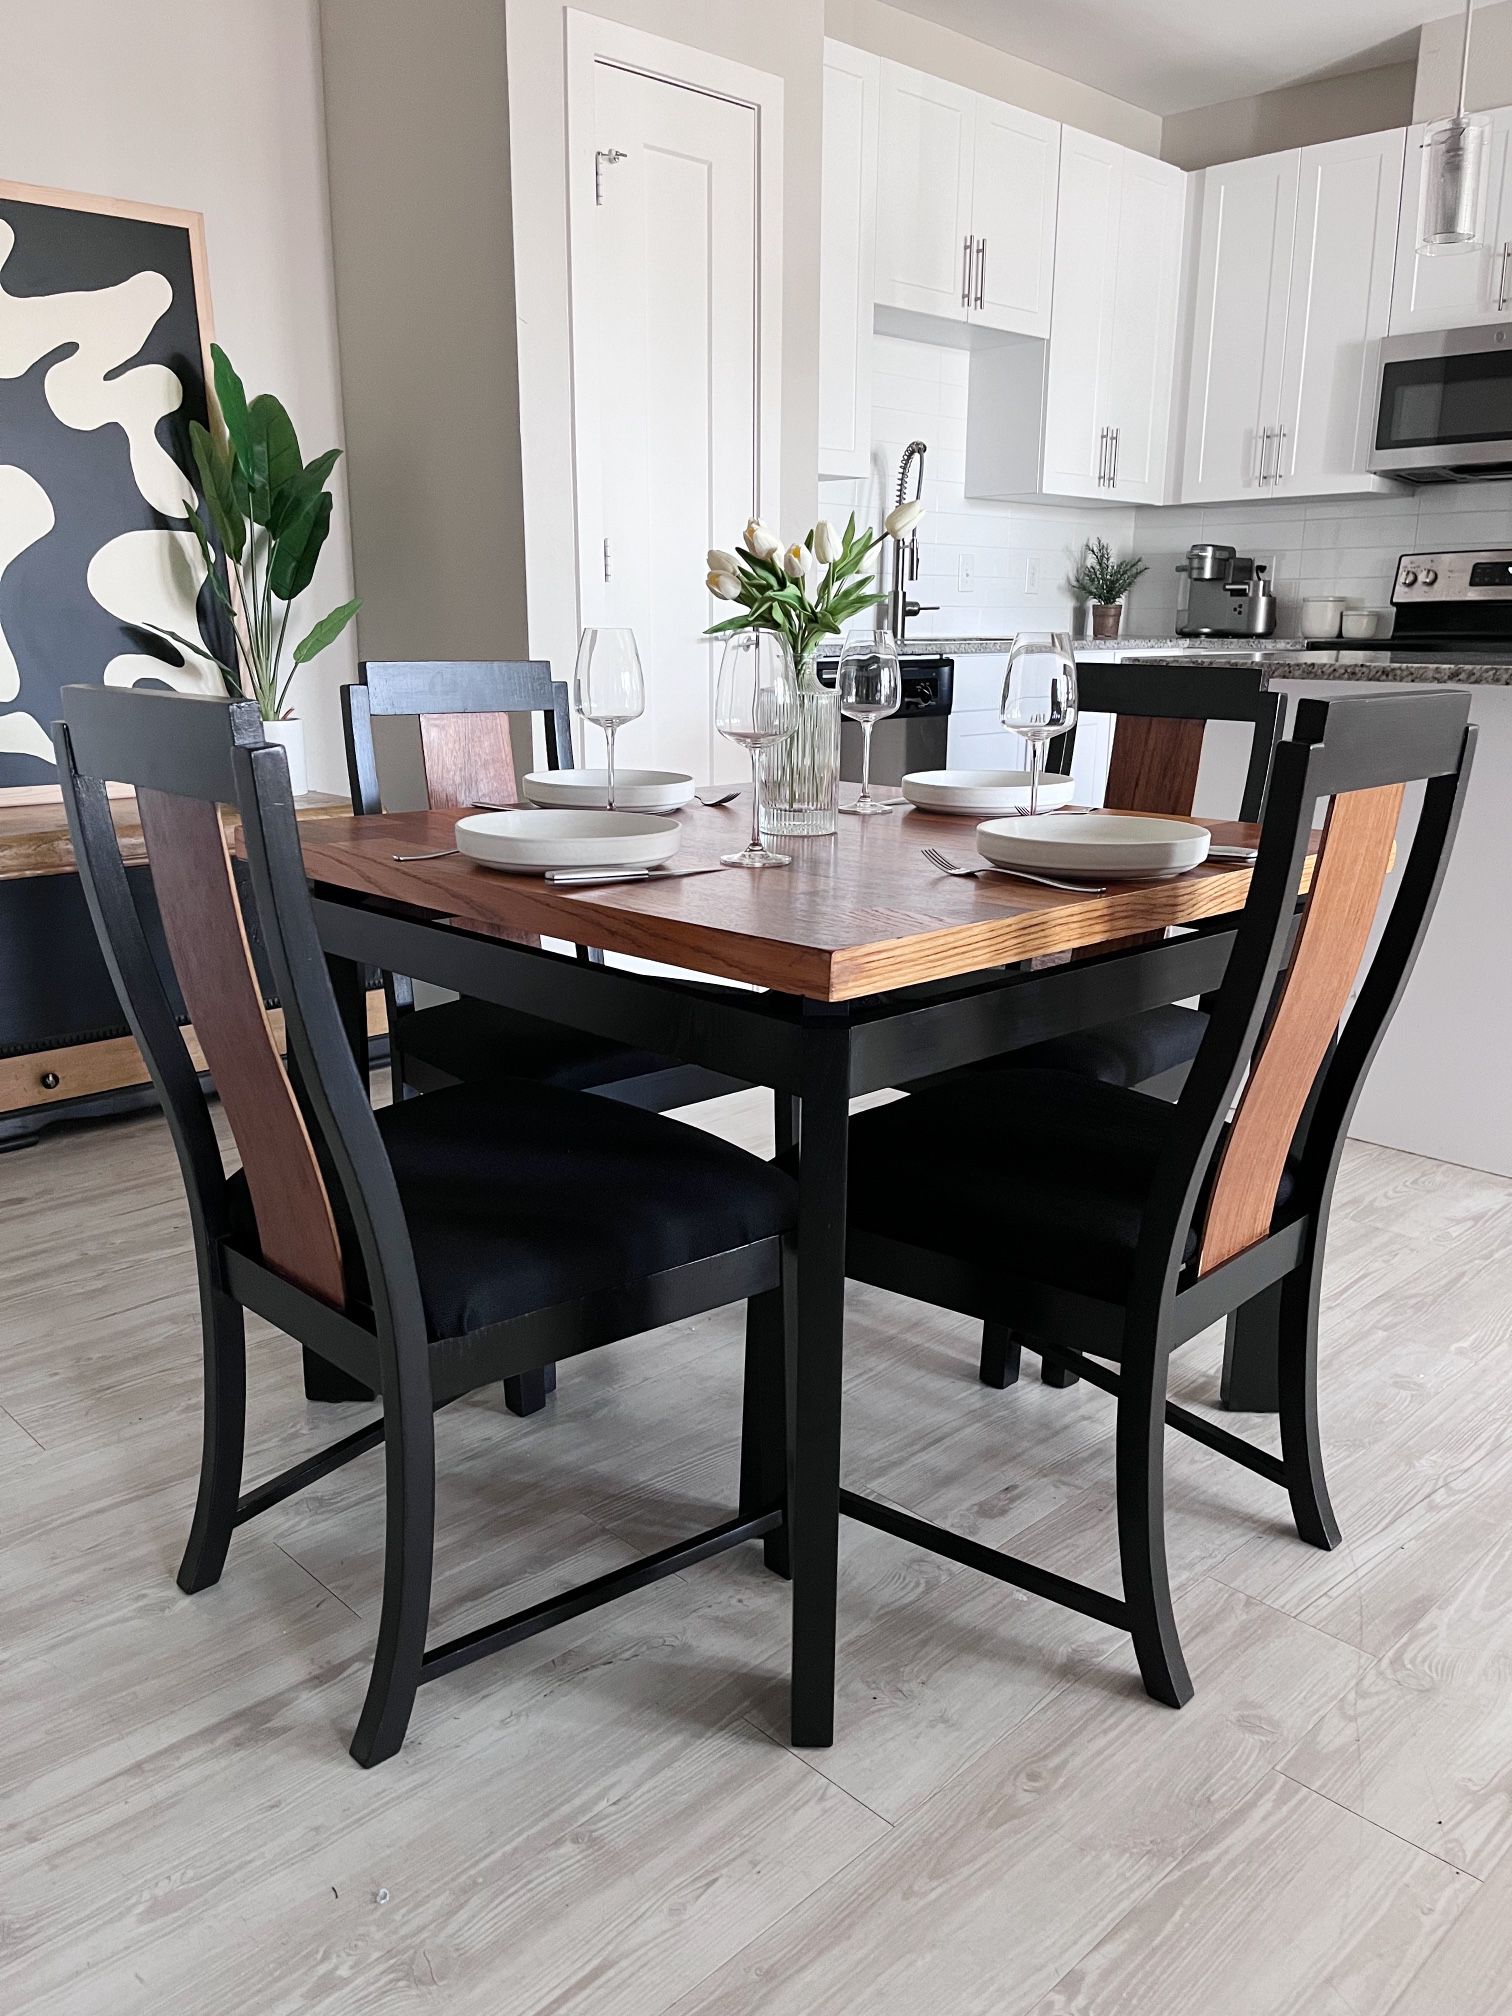 Lane Furniture Dining table and 4 chairs